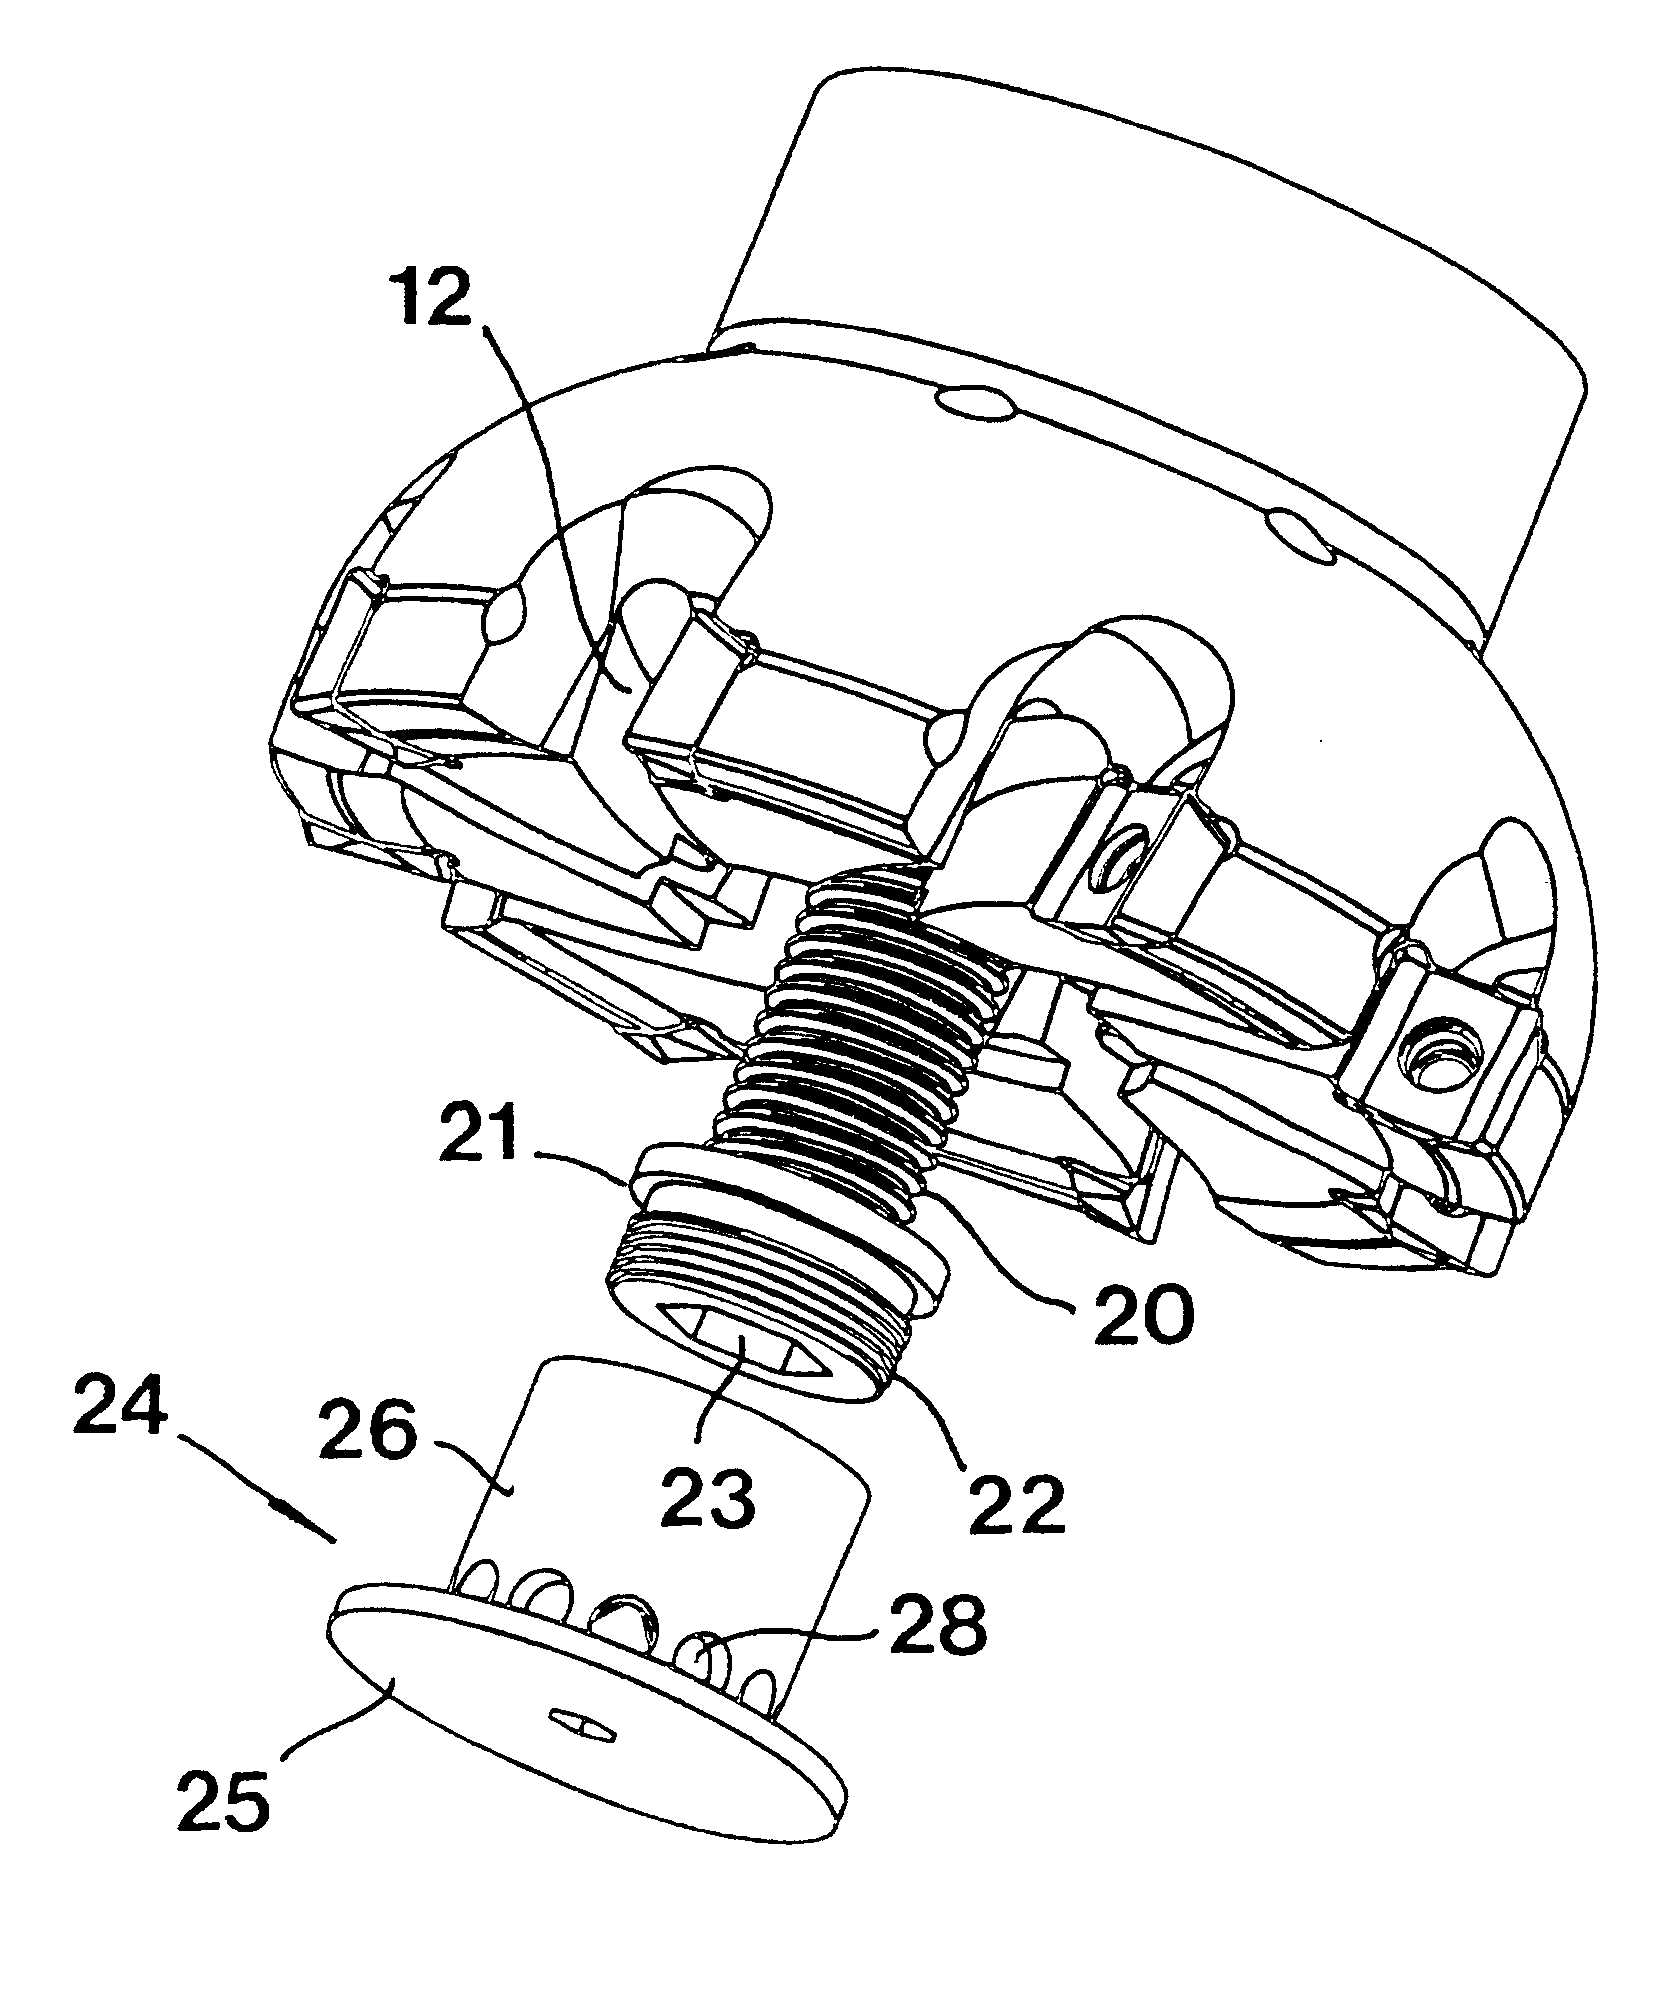 Tool for chip removing machining and having fluid-conducting branch ducts